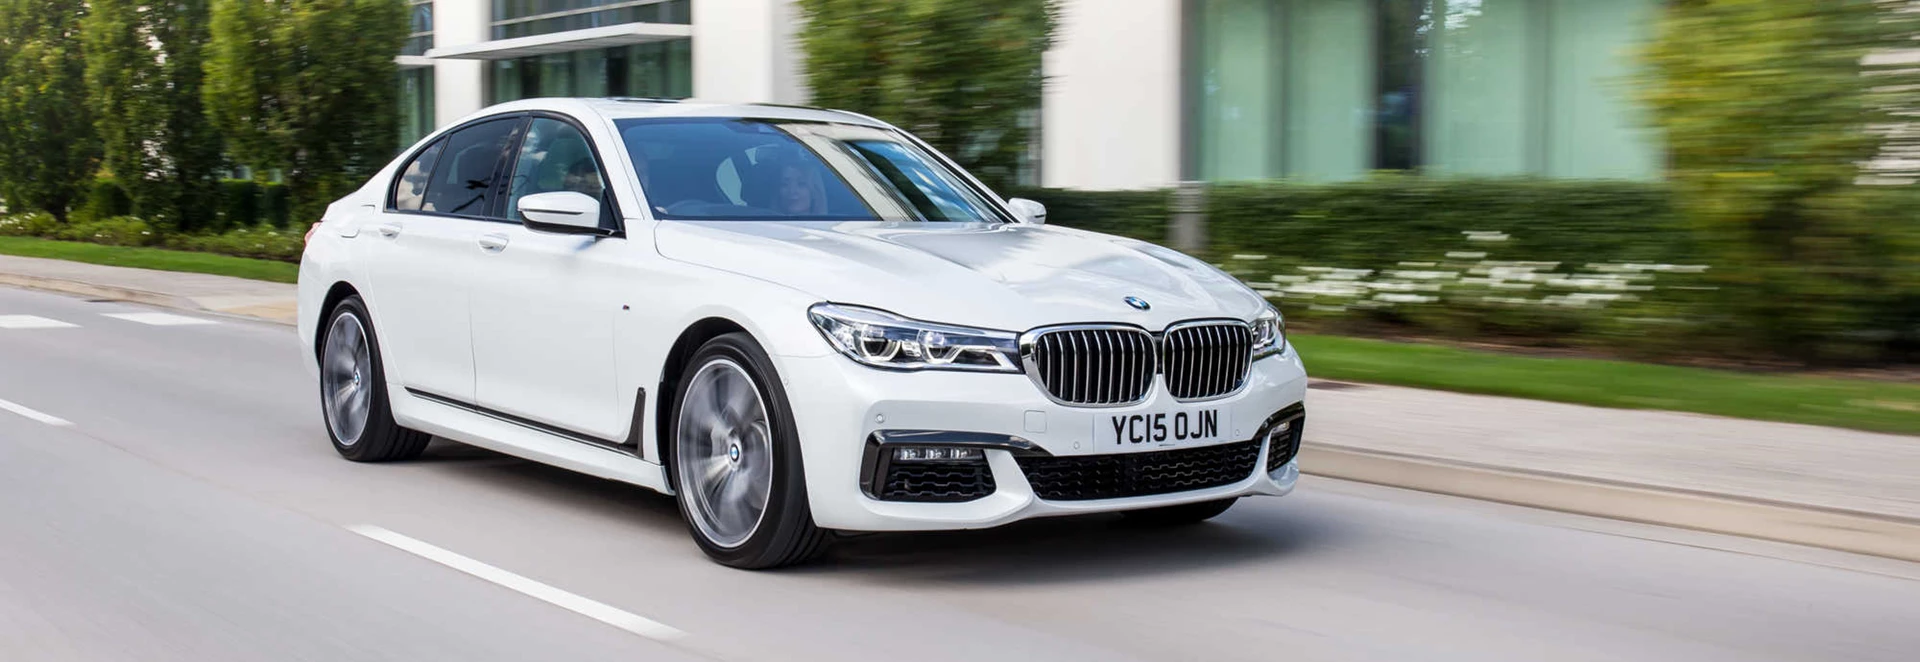 BMW 7 Series saloon review 